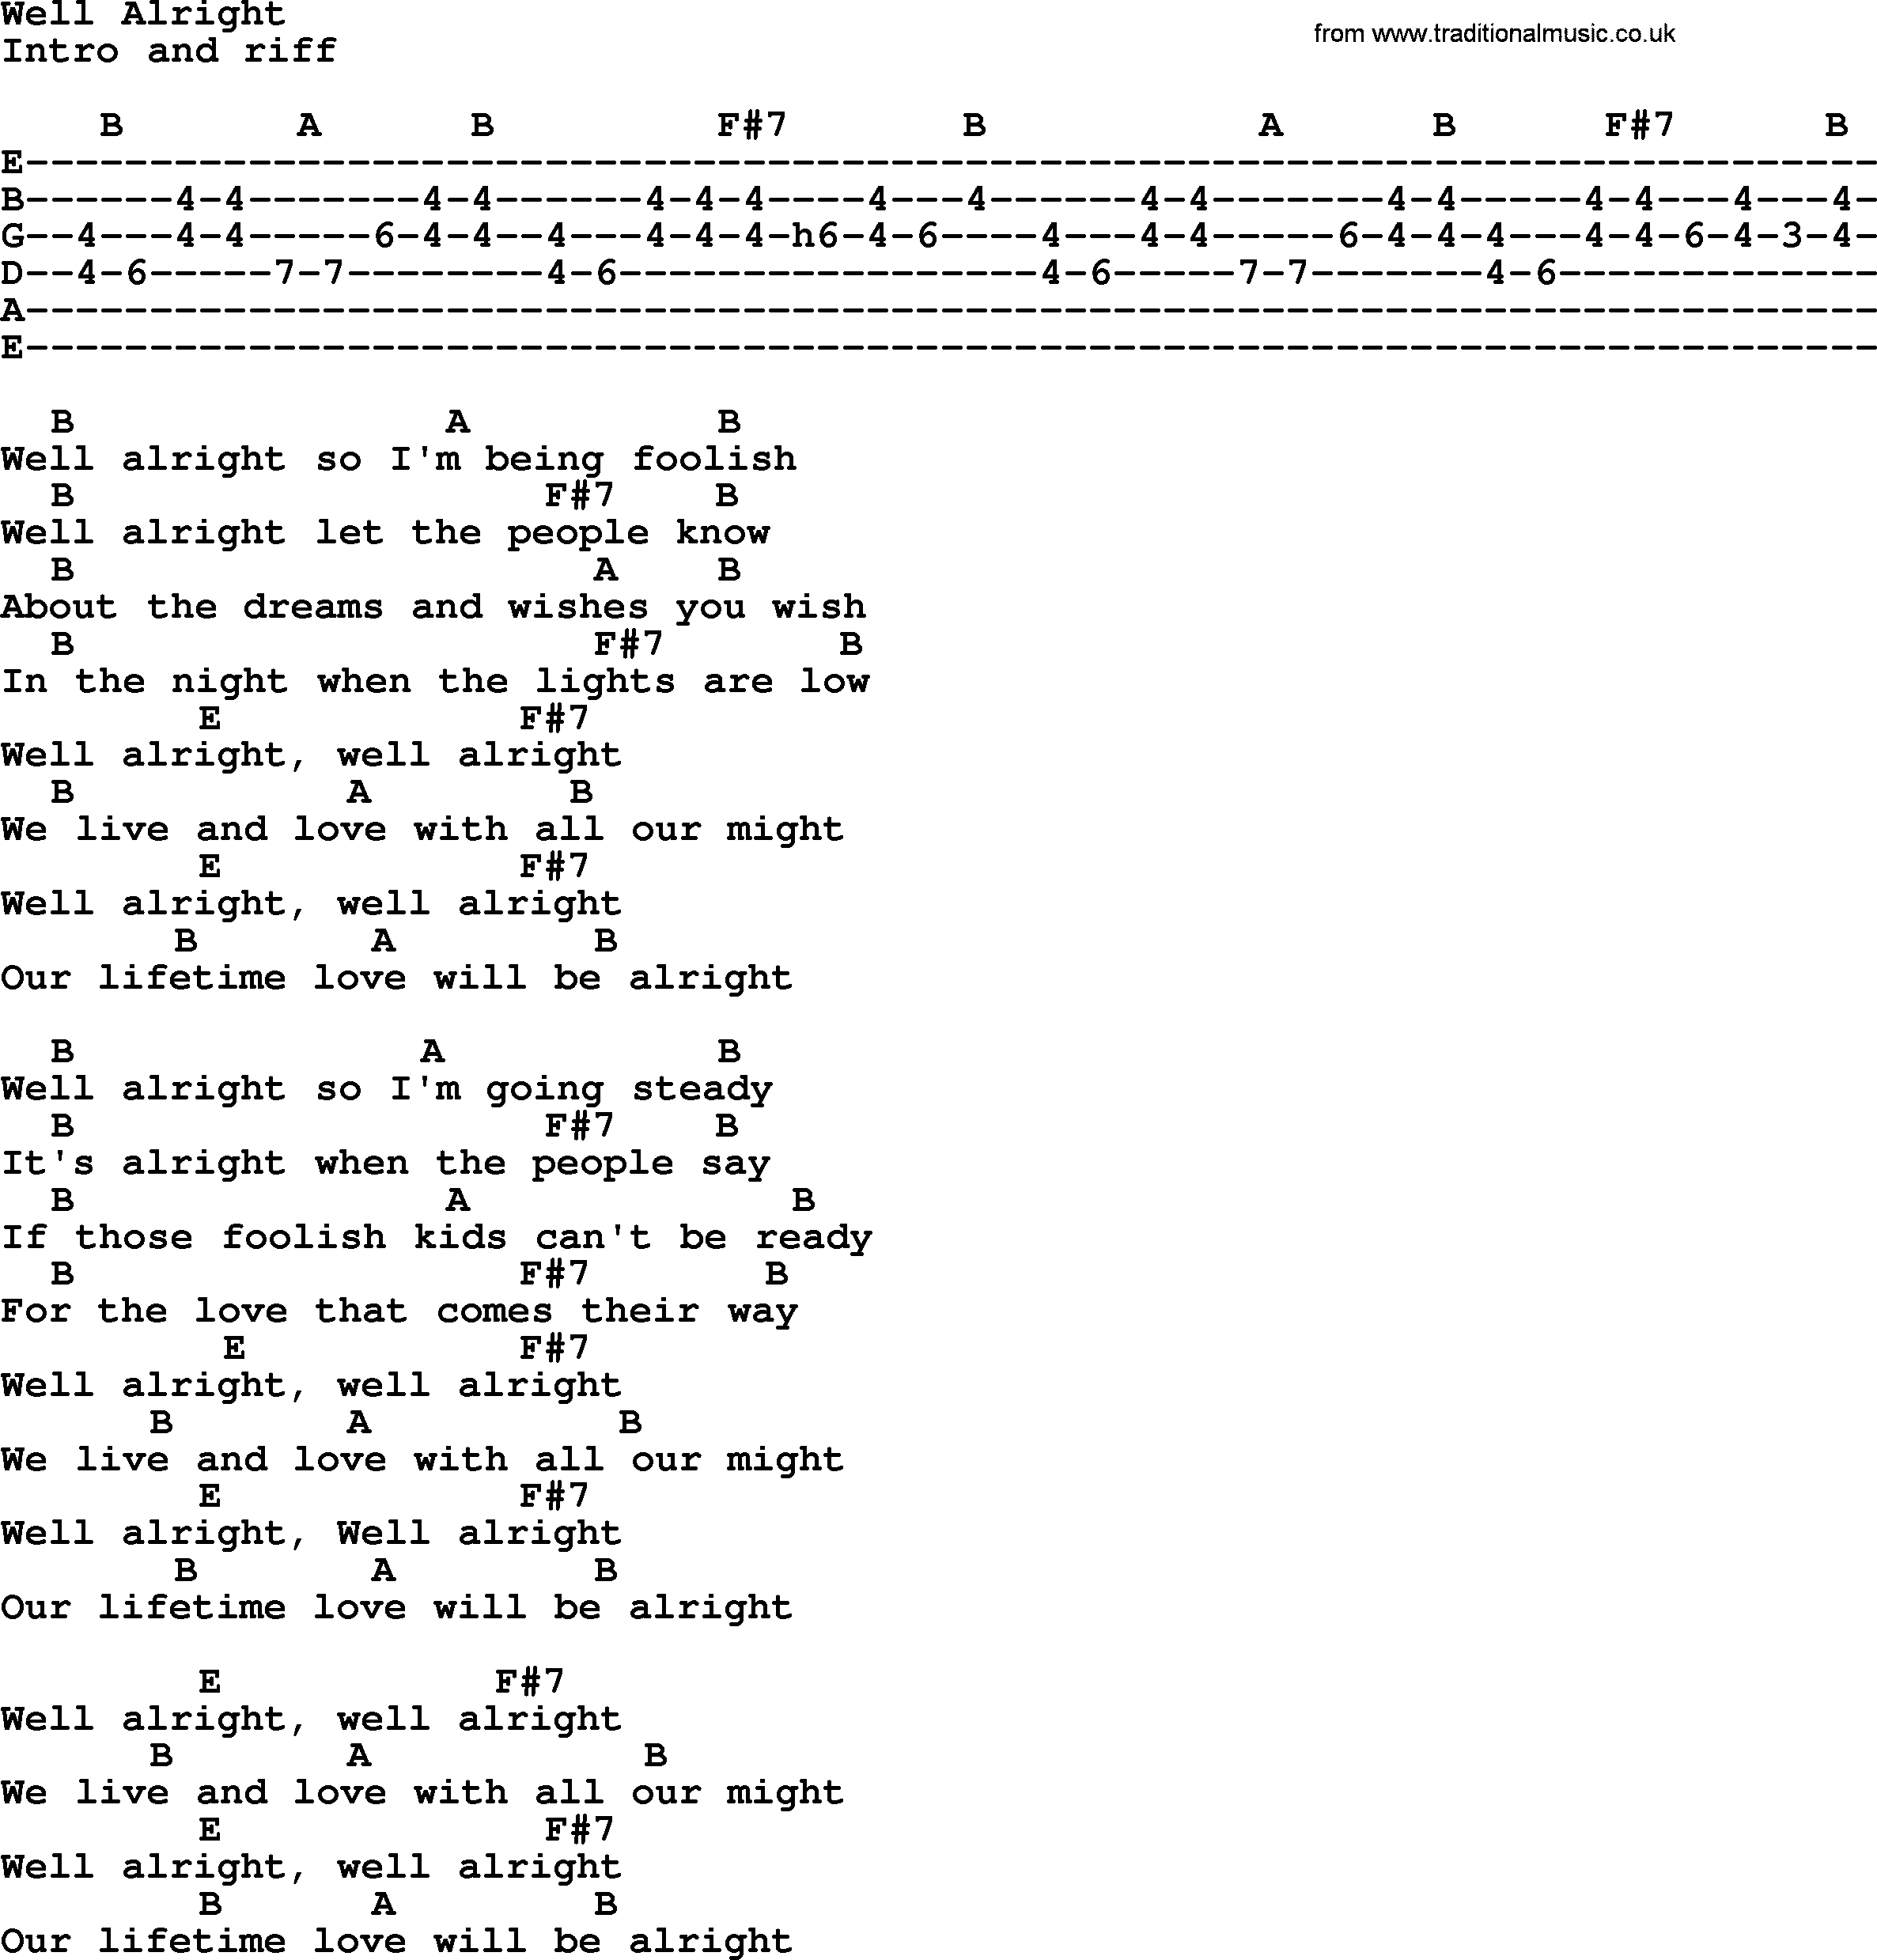 Bluegrass song: Well Alright, lyrics and chords